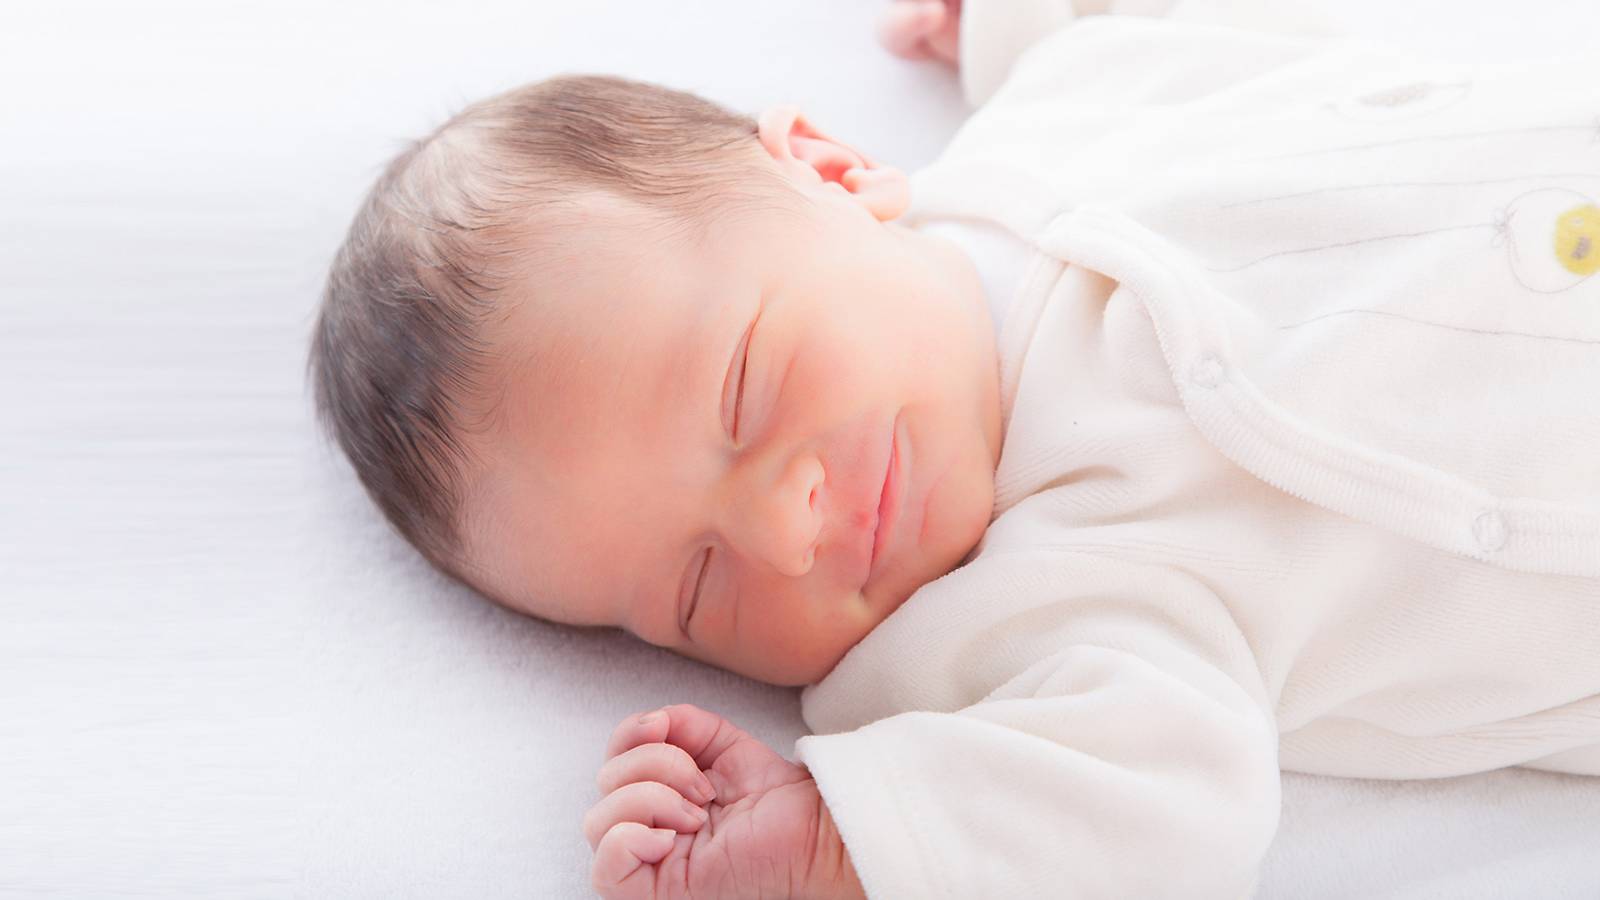 8 ways to help your baby sleep soundly [Infographic]